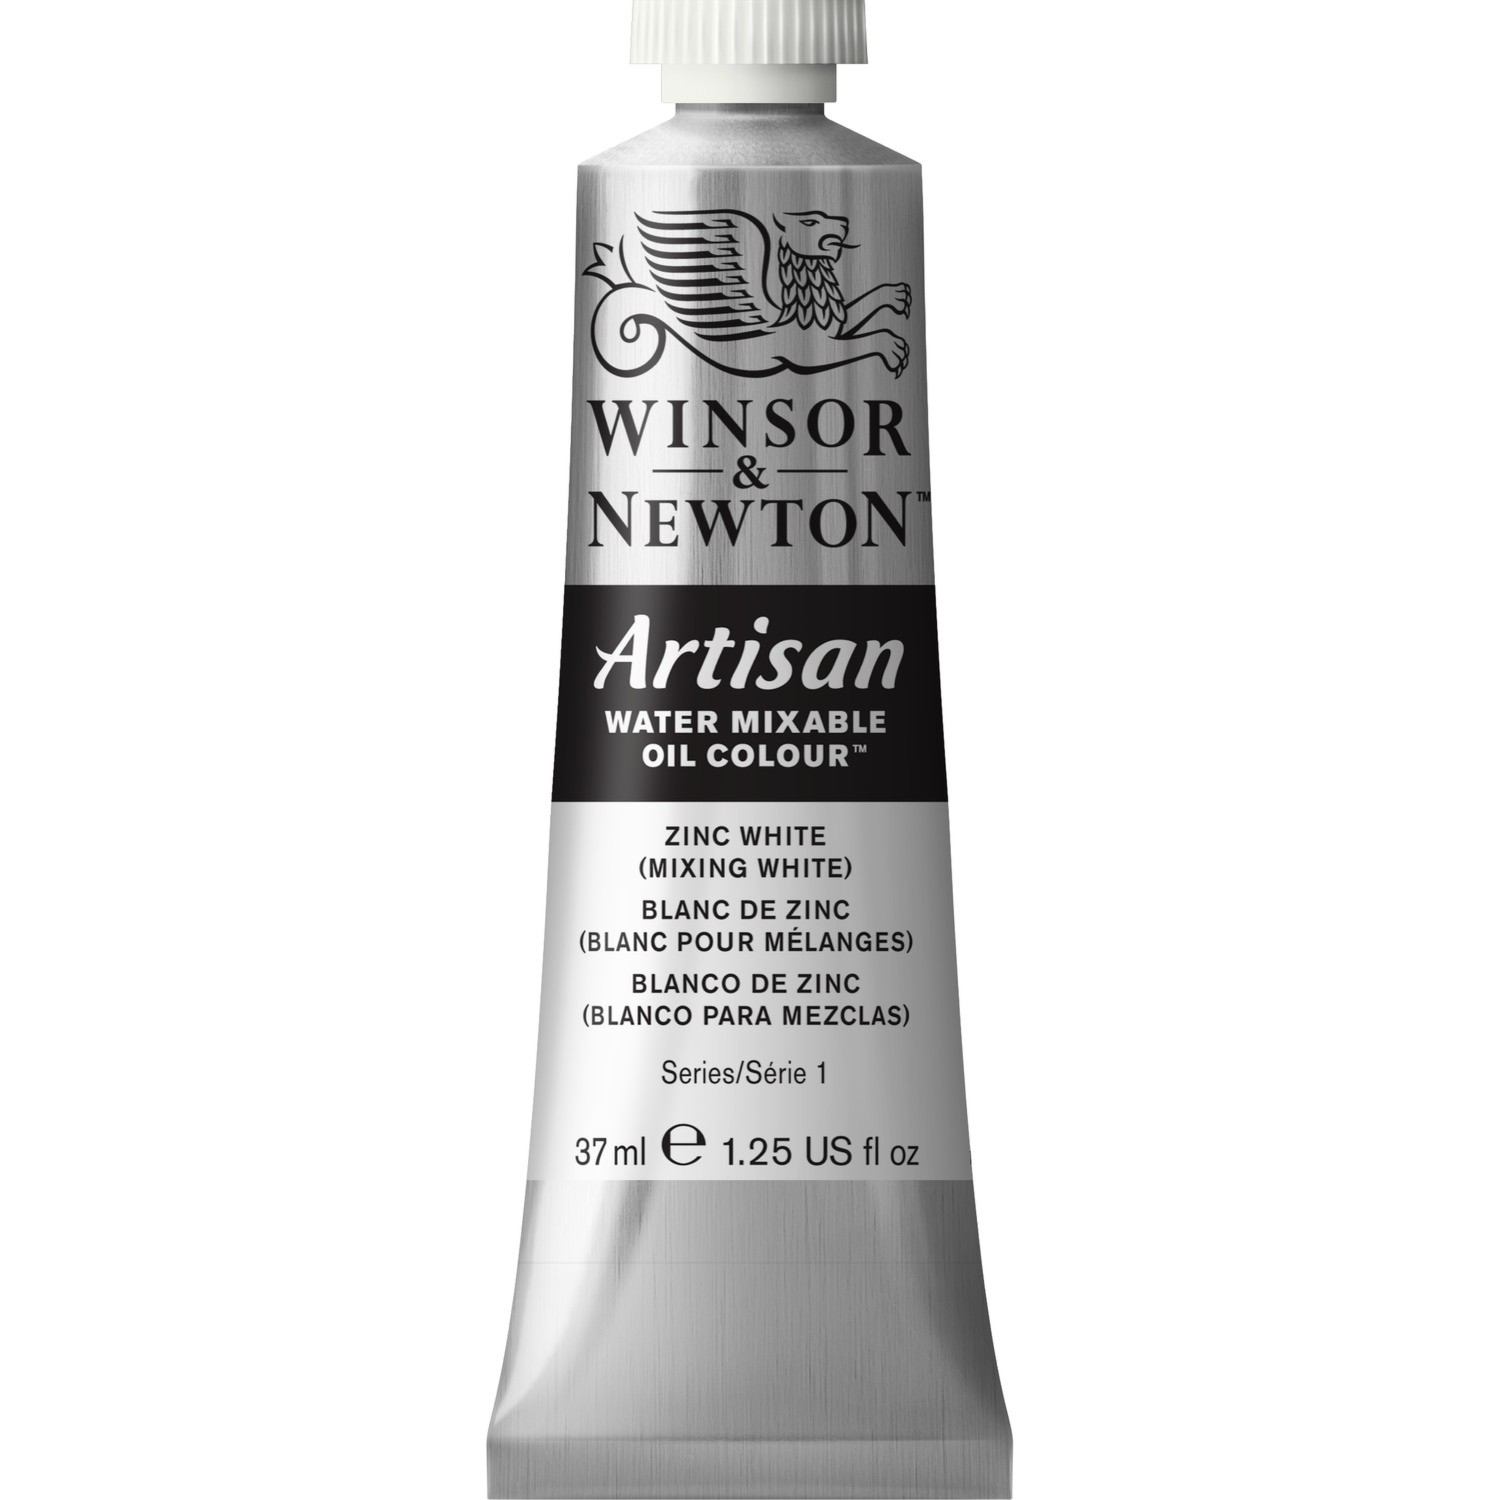 Winsor and Newton 37ml Artisan Mixable Oil Paint - Zinc White Image 1